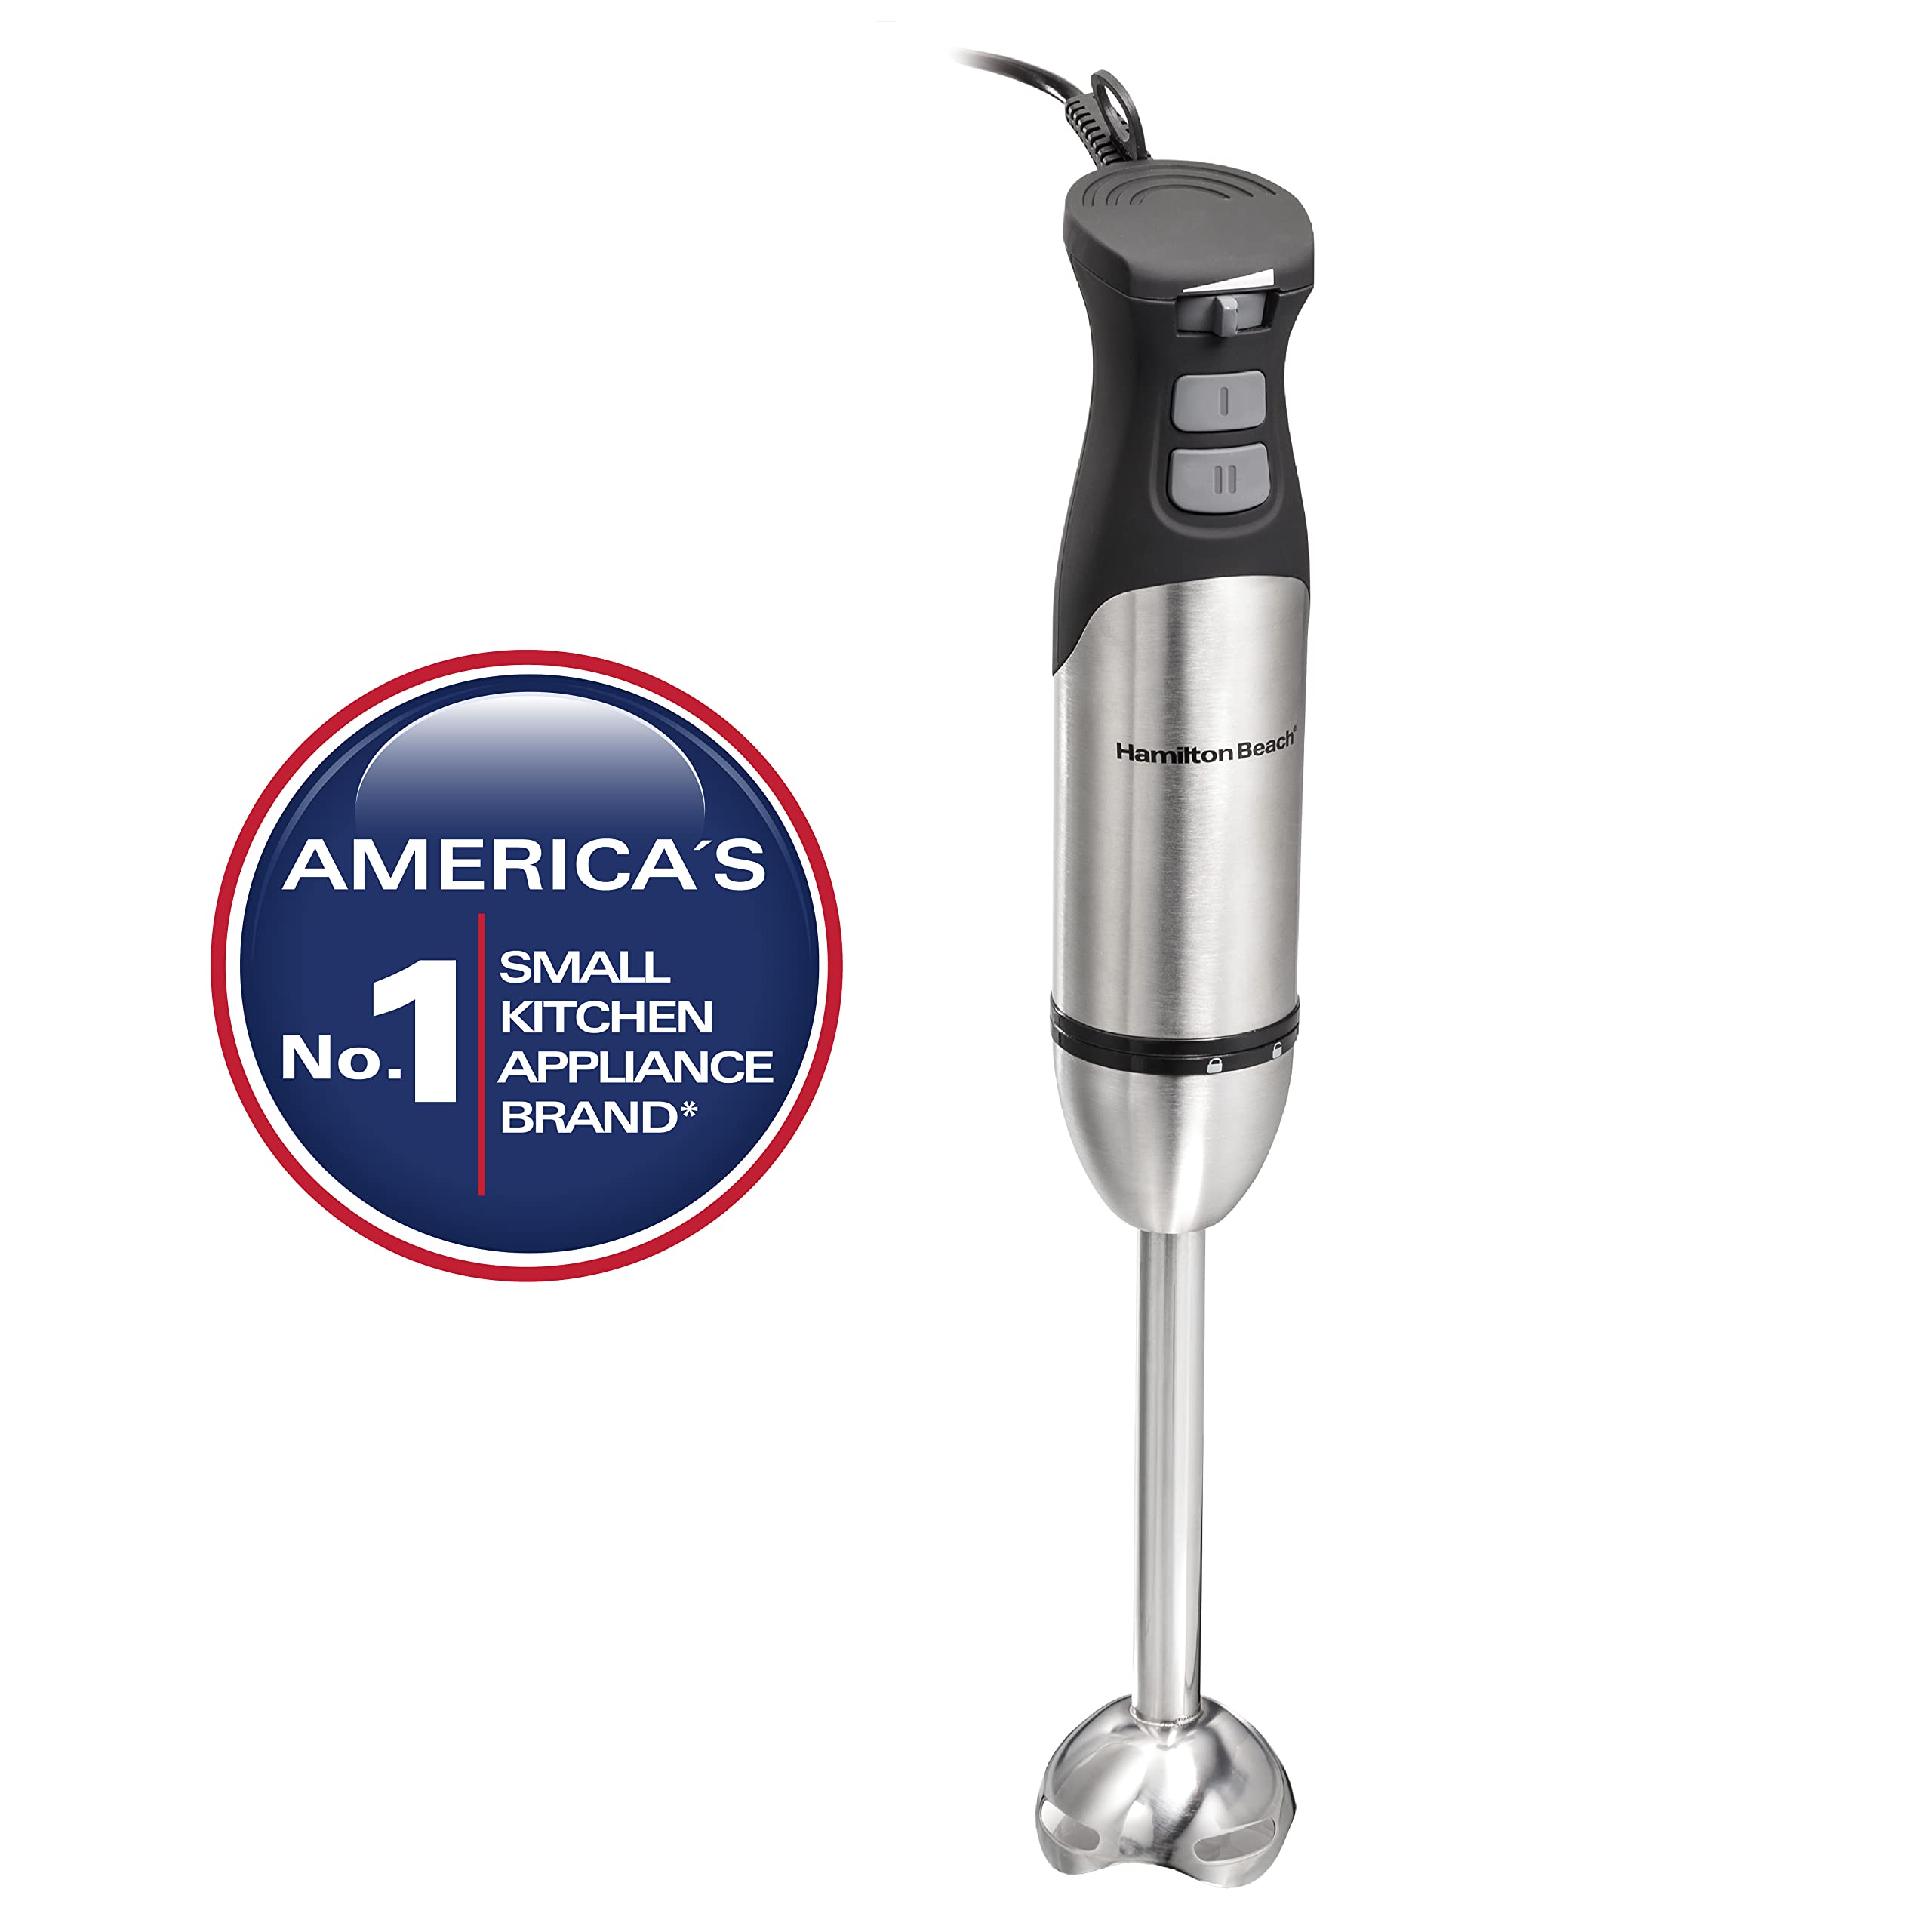 Hamilton Beach 5 In 1 Stainless Steel Hand Blender, Powerful Turbo Boost With Variable Speeds, Chopper, Mixer, Food Processor